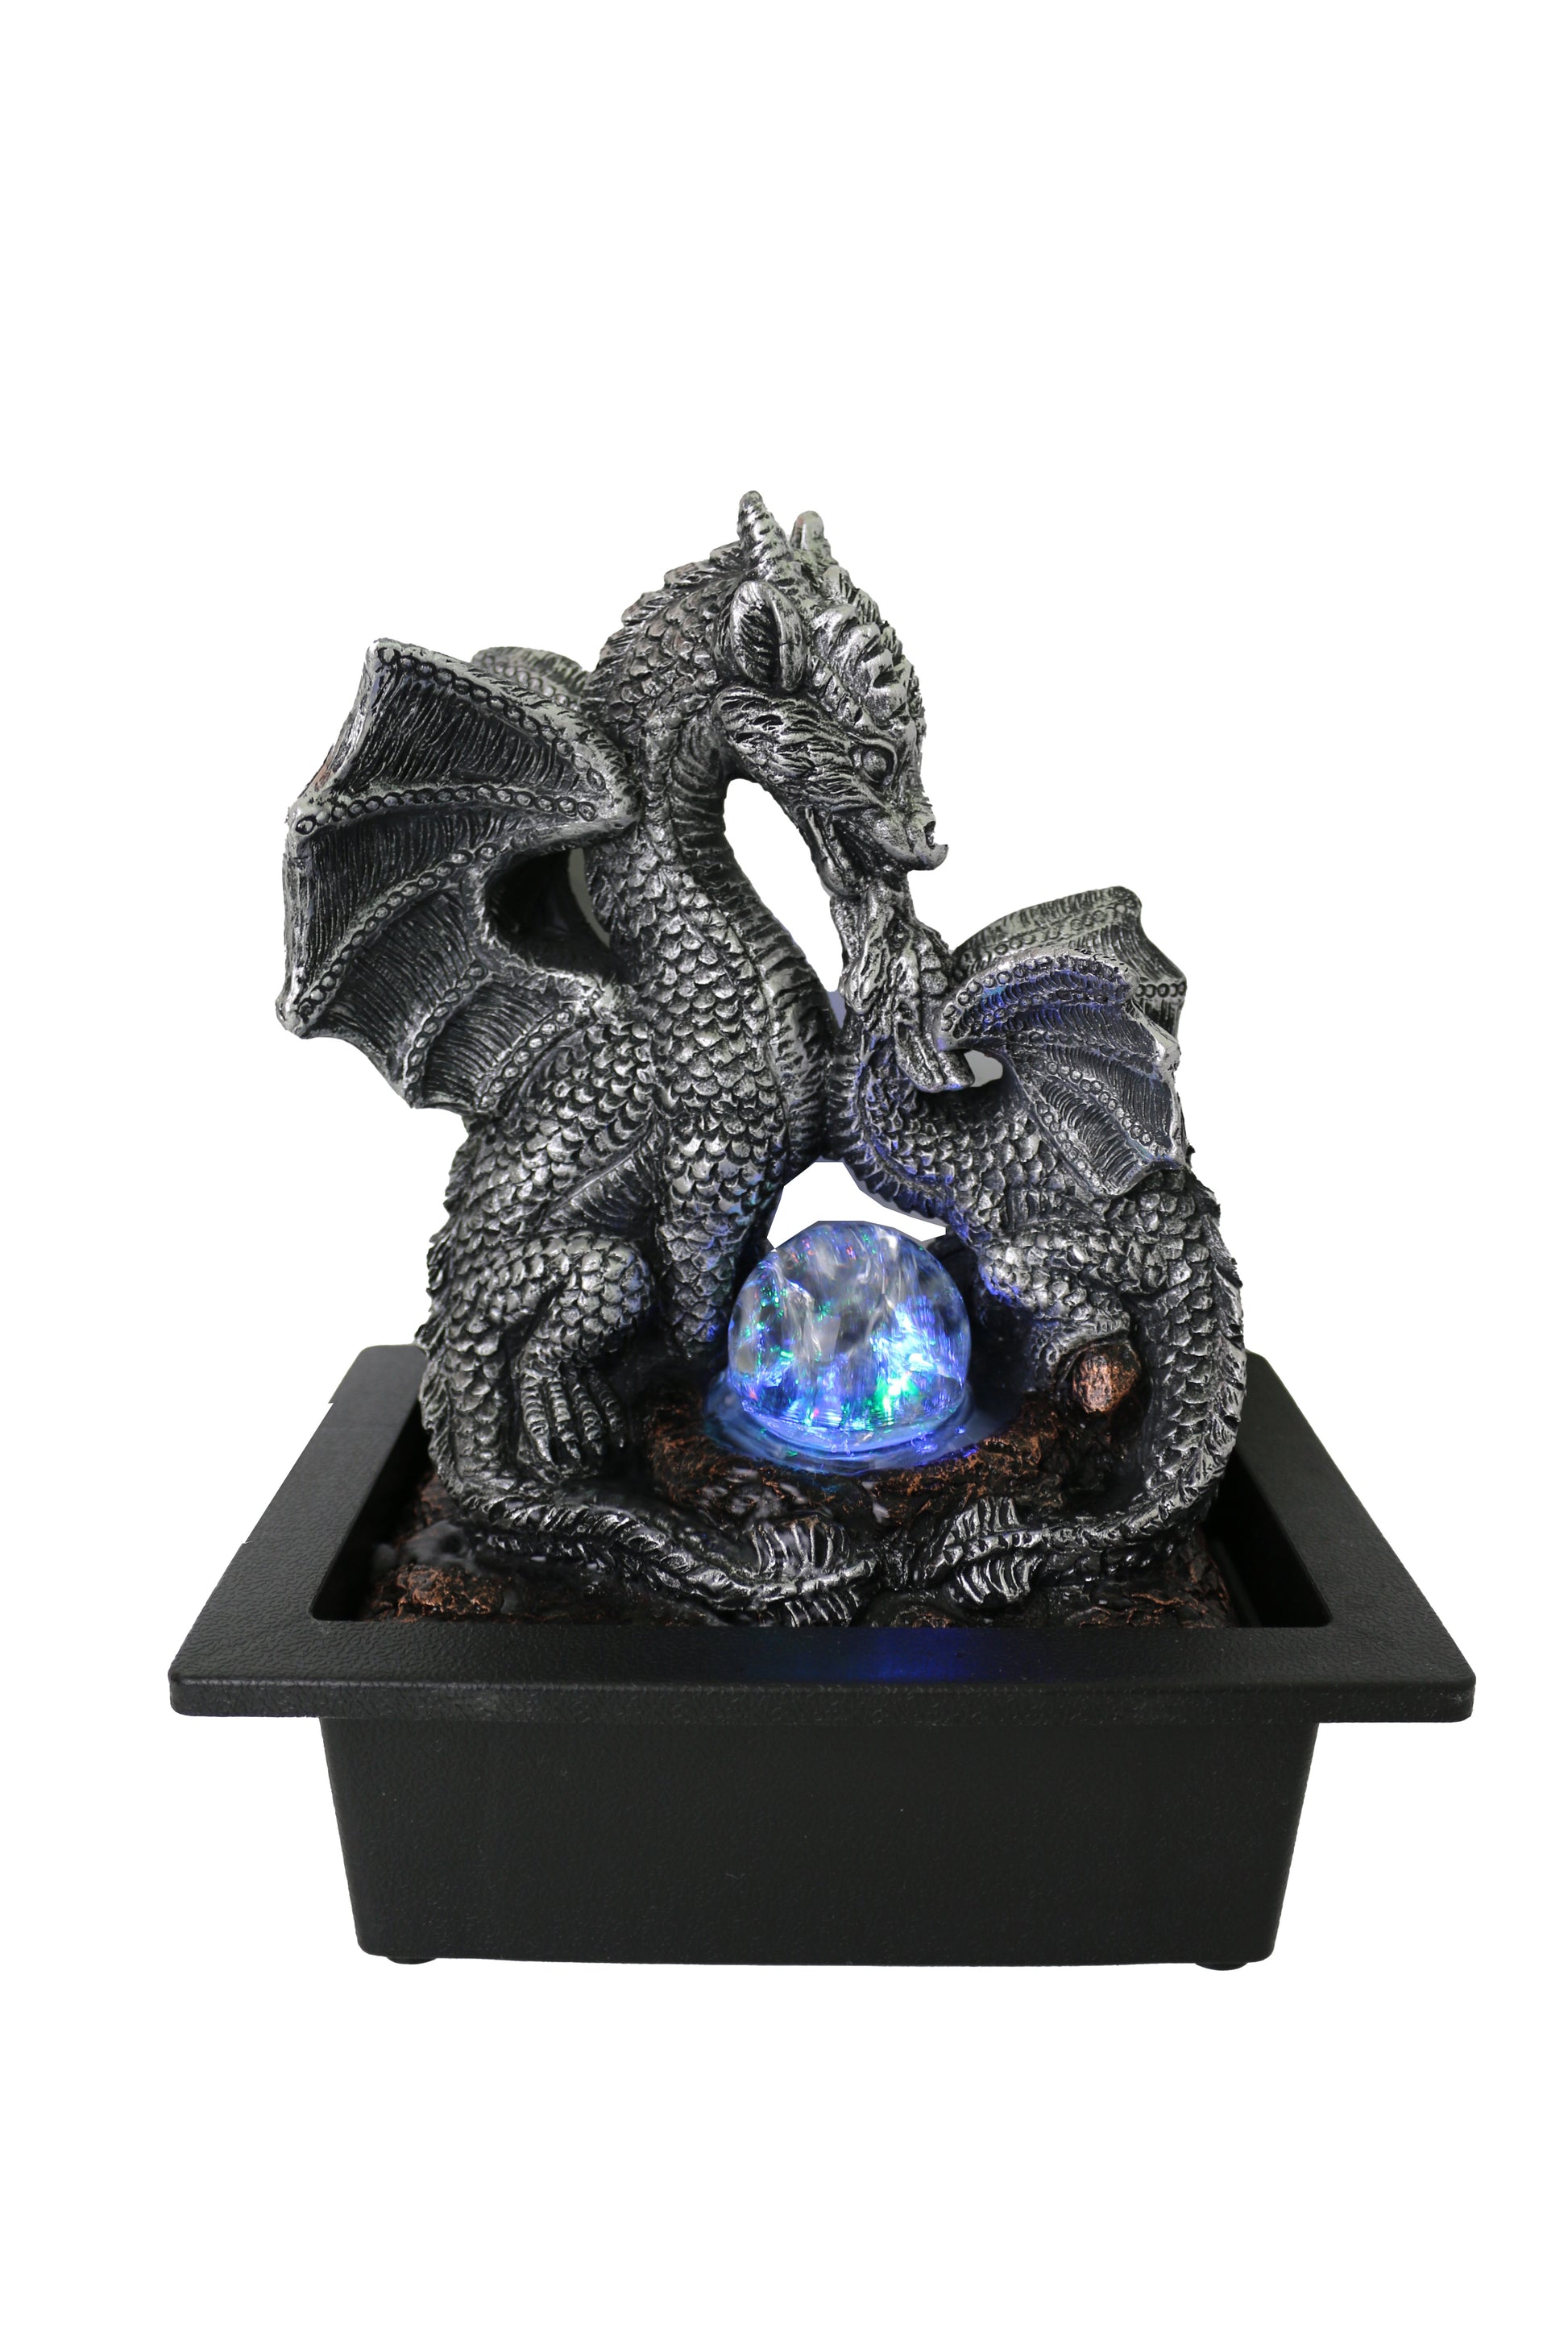 Legendary Dragons Fountains Water Feature  